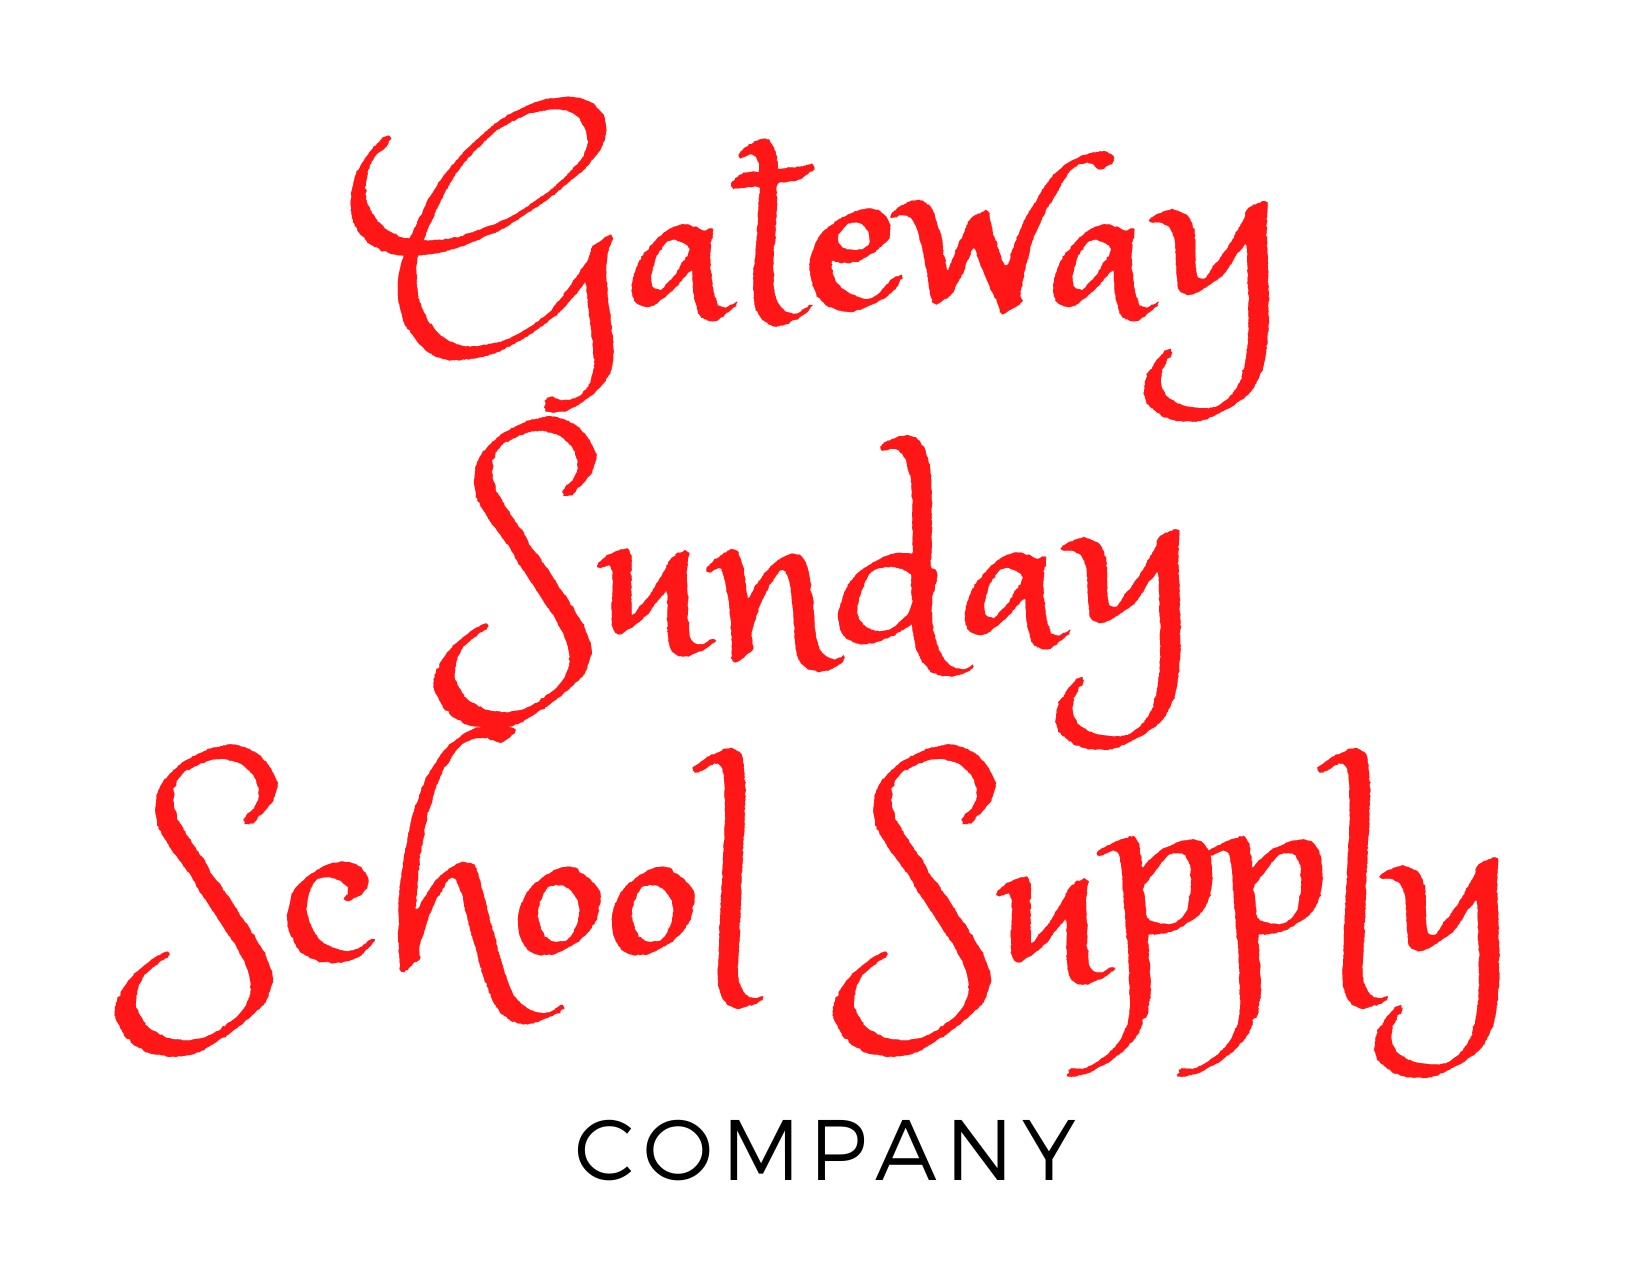 Episode 2: Introduction to Gateway Sunday School Supply Company